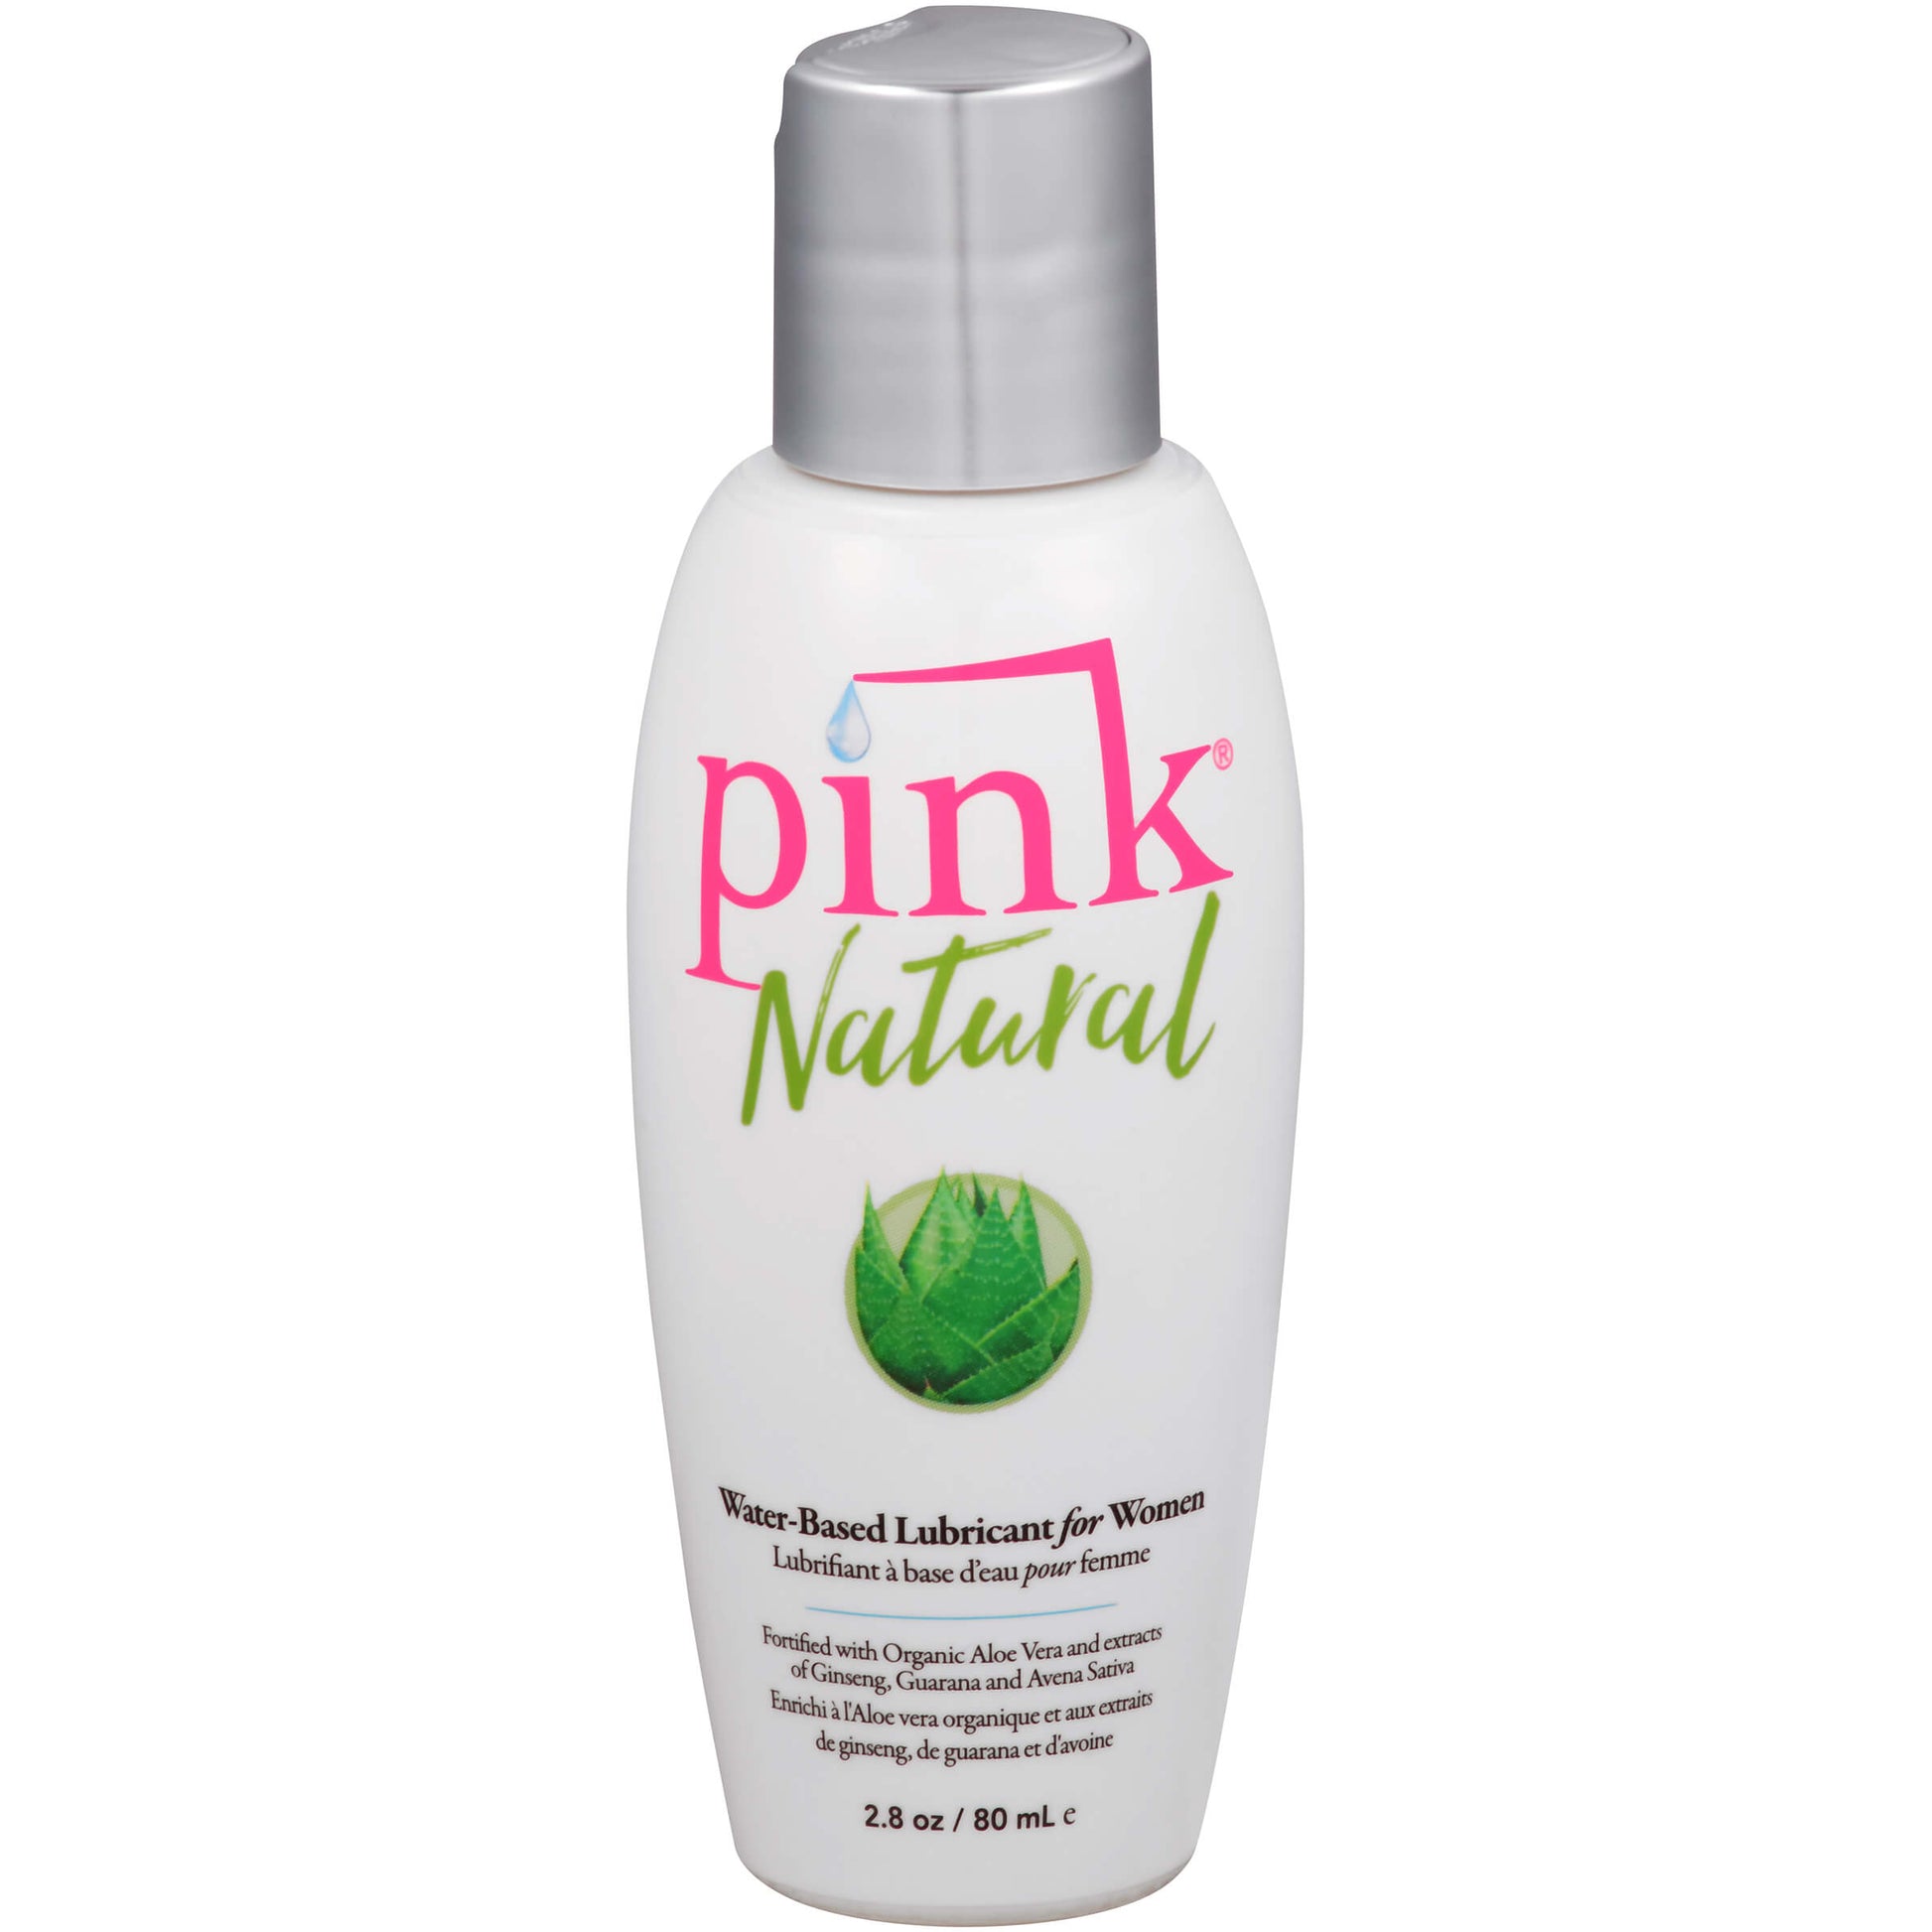 PINK Natural Water-Based Lubricant - The Bigger O - online sex toy shop USA, Canada & UK shipping available